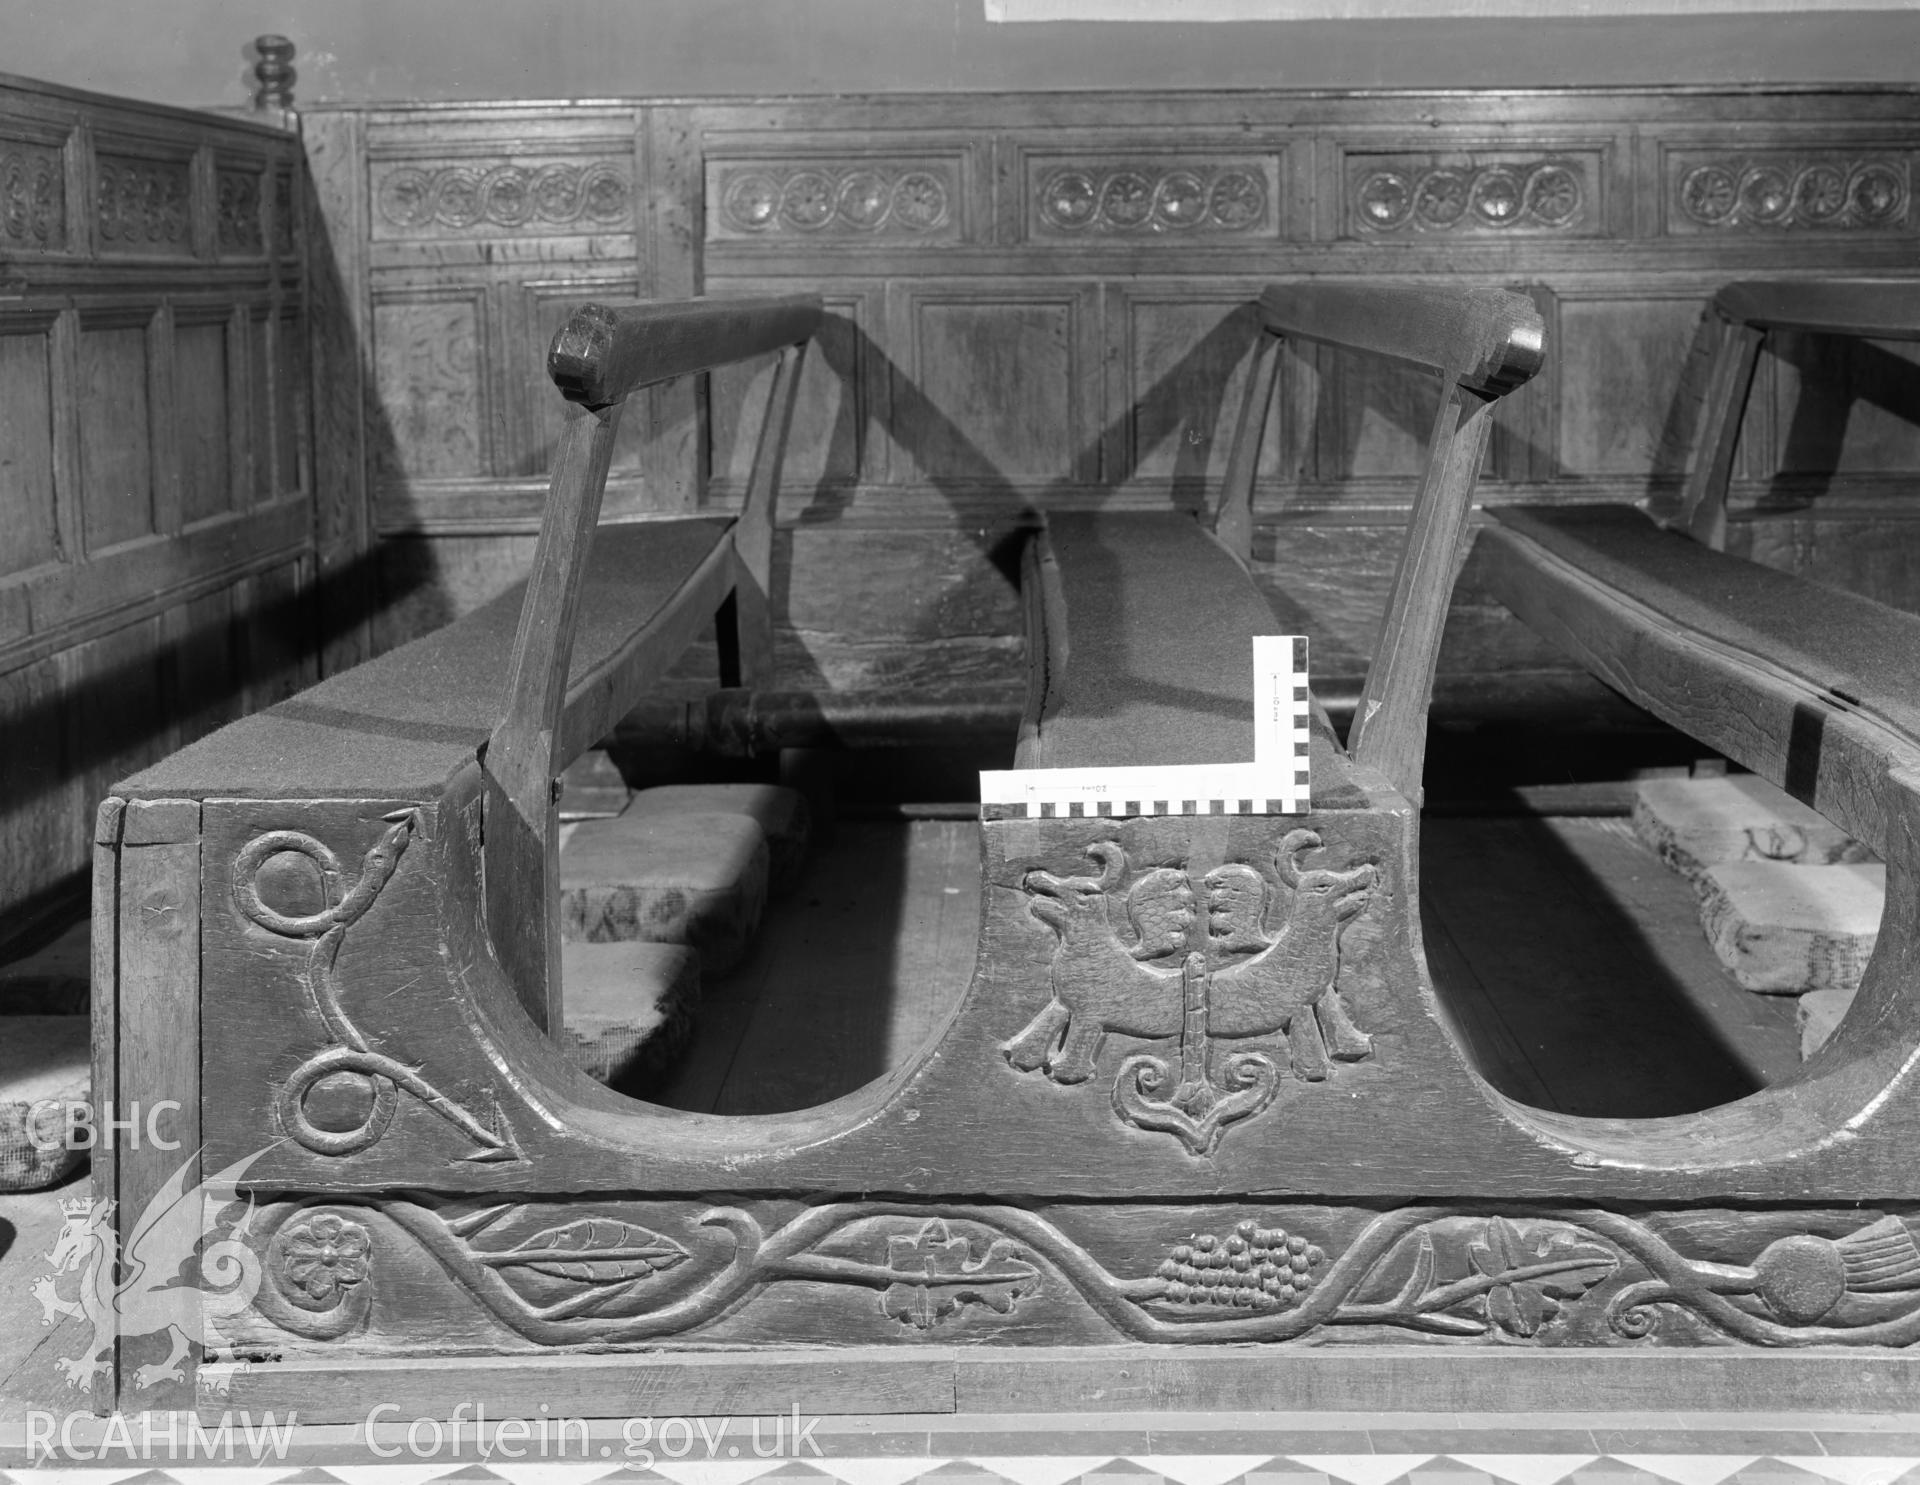 Digital copy of a black and white negative showing carved wooden pews at Rhug Chapel, taken by Department of Environment, 1976